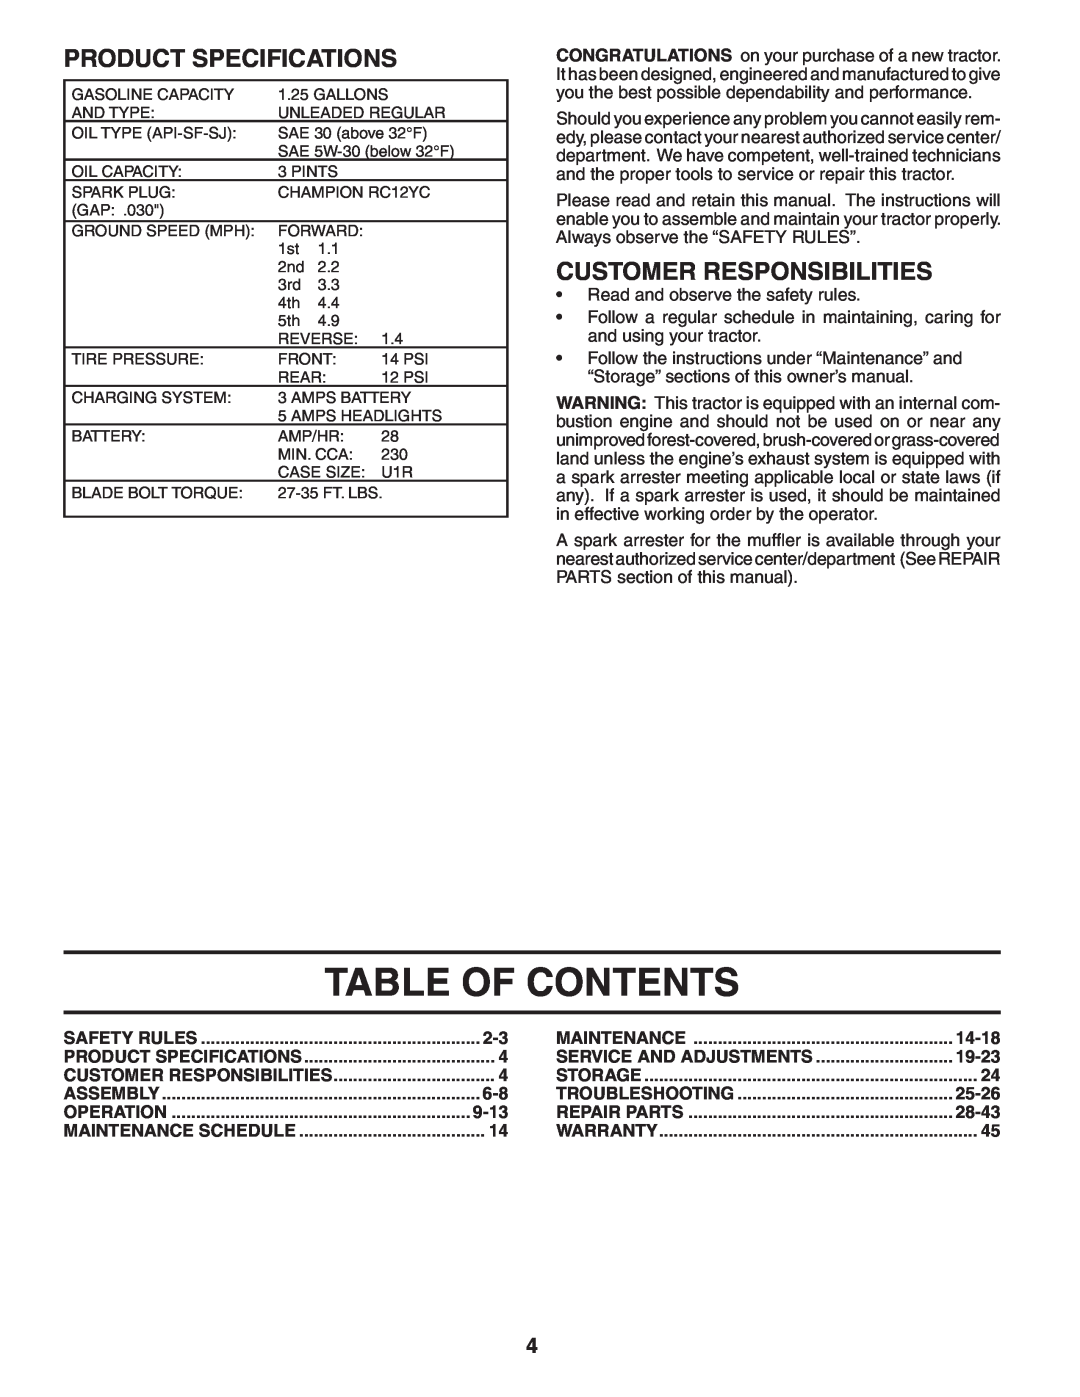 Weed Eater WE12538M Table Of Contents, Product Specifications, Customer Responsibilities, 9-13, 14-18, 19-23, 25-26, 28-43 